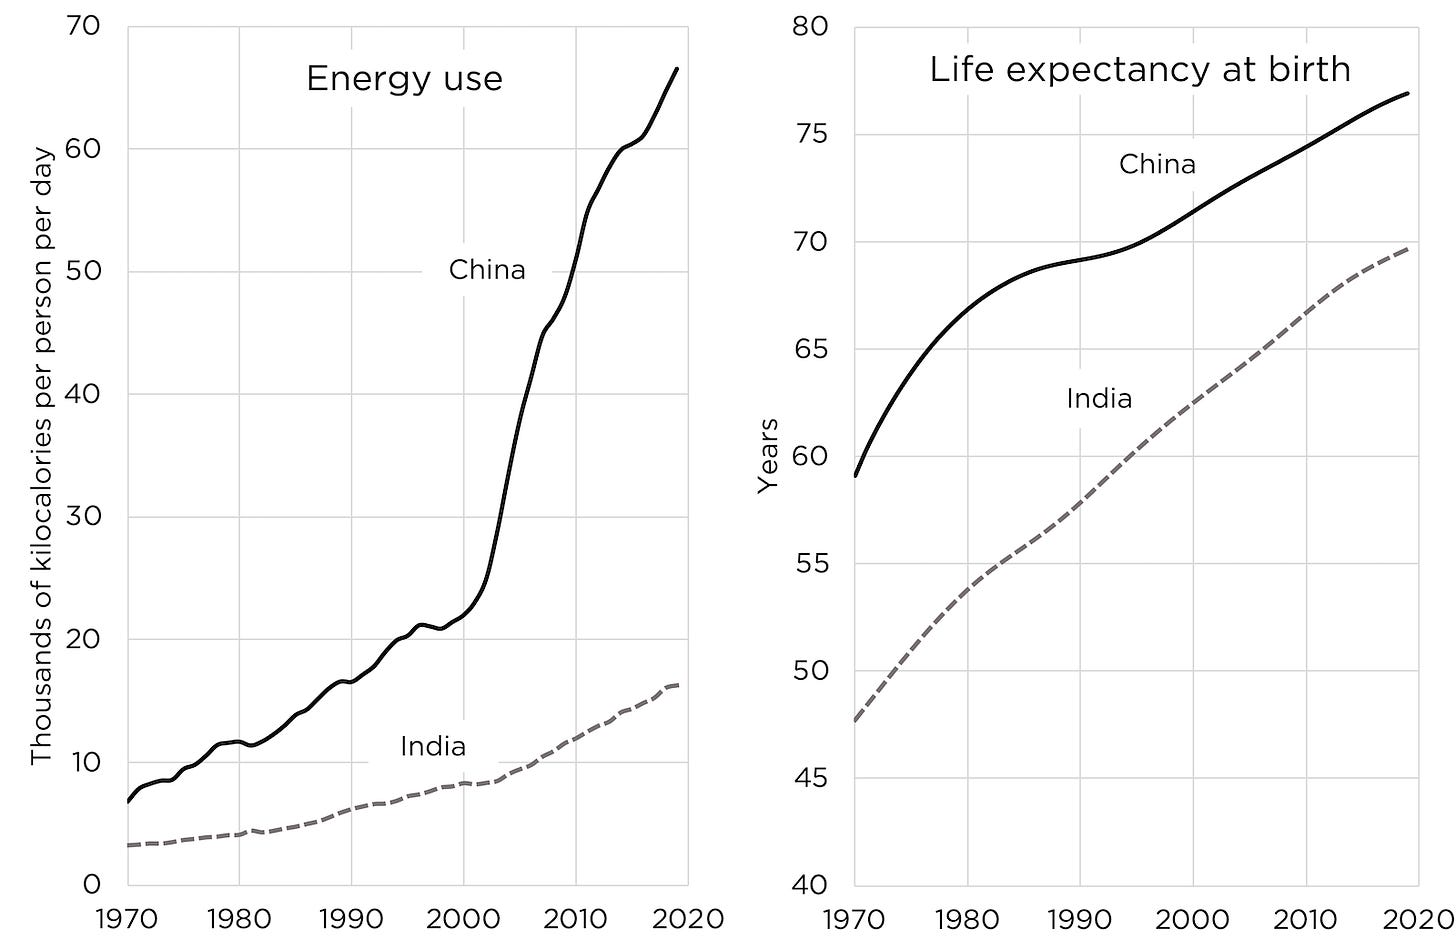 Energy Use vs Life expectancy at birth 